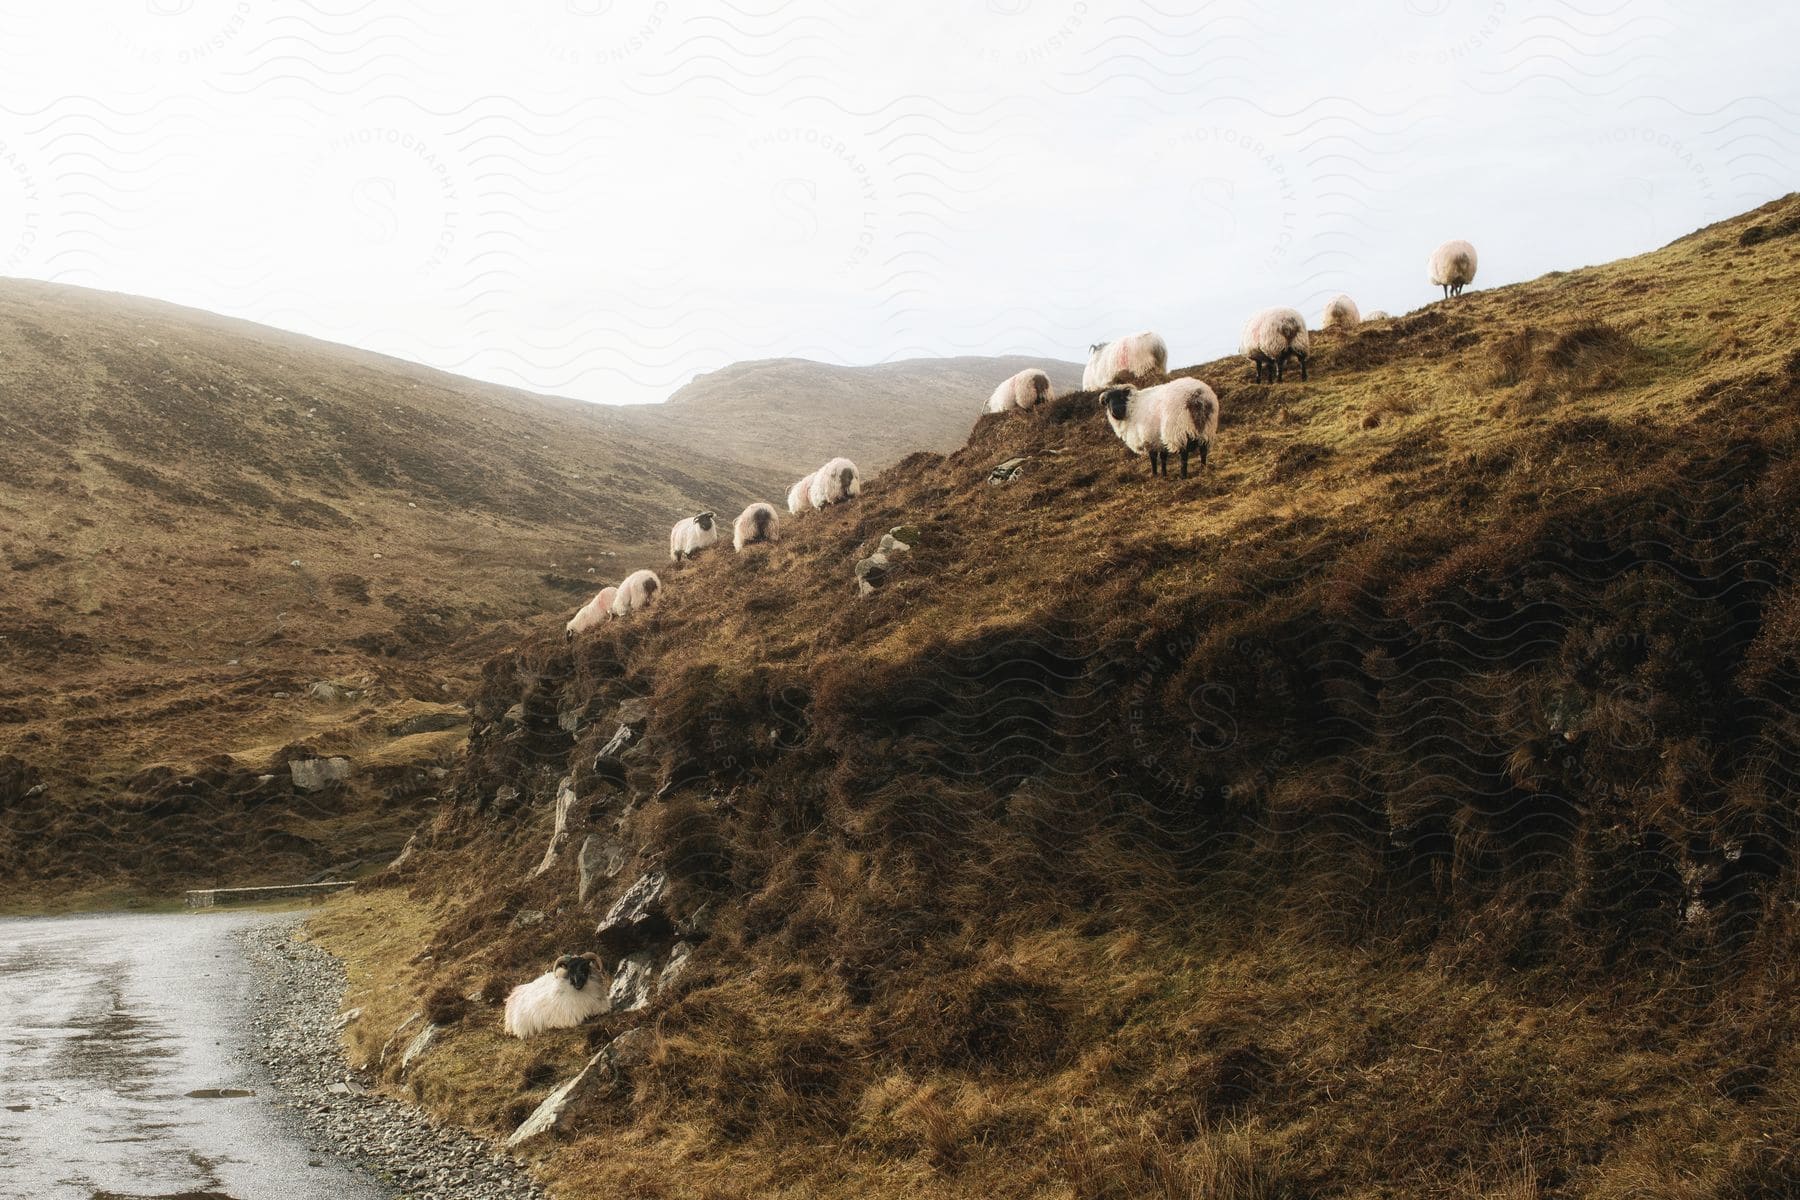 Sheep leaping down from a cliff near a serene lake